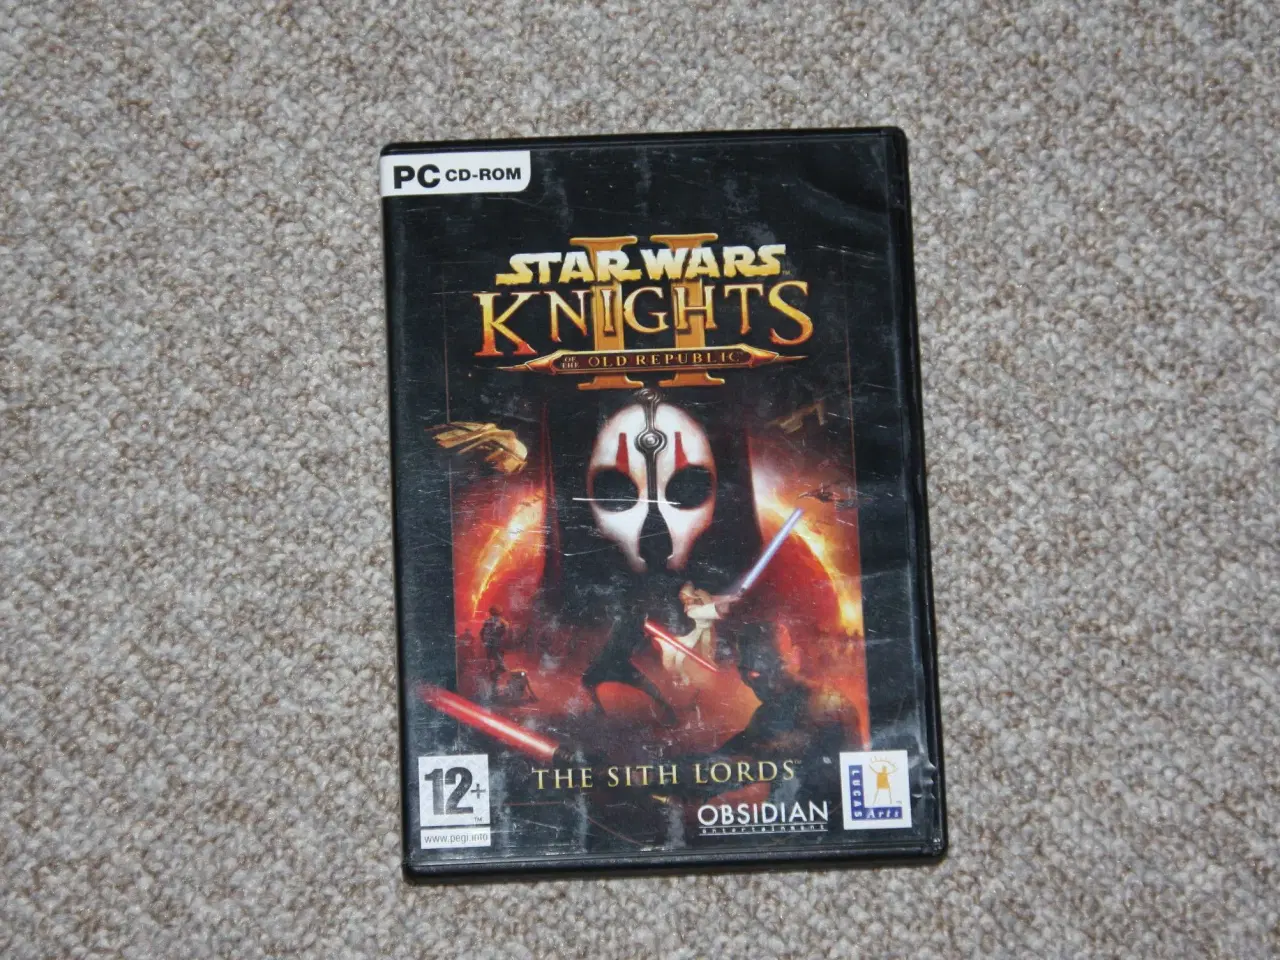 Billede 4 - Star Wars Knights of the Old Republic